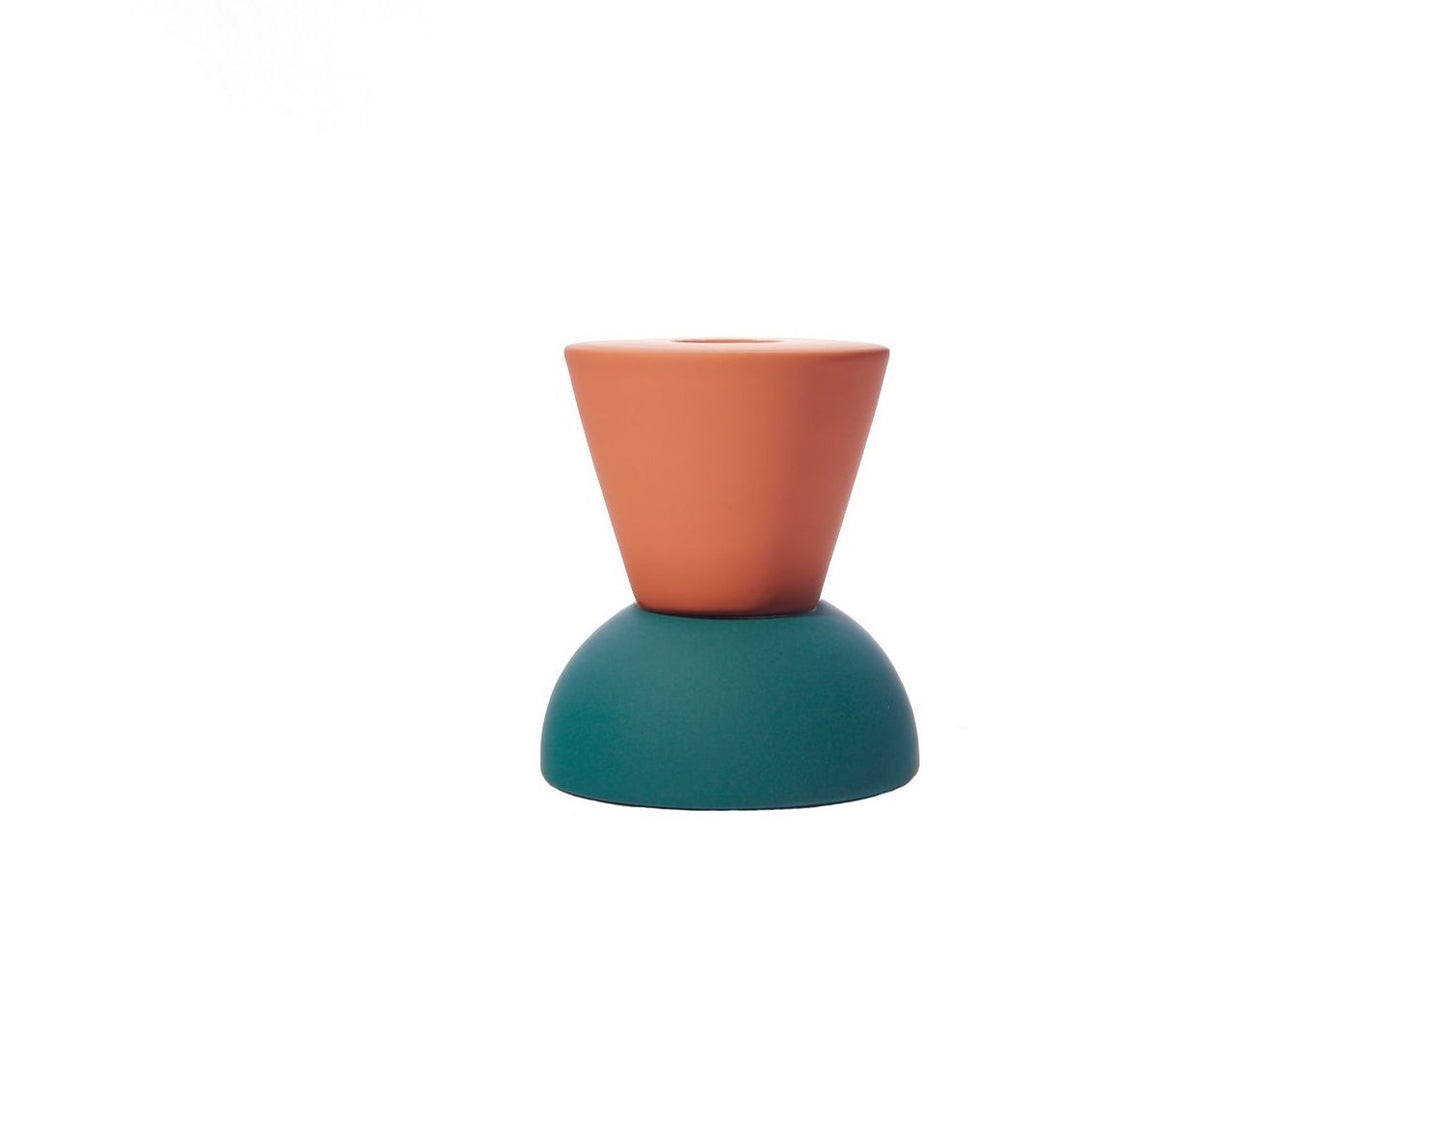 Stacked Incense Holder - Peach & Teal